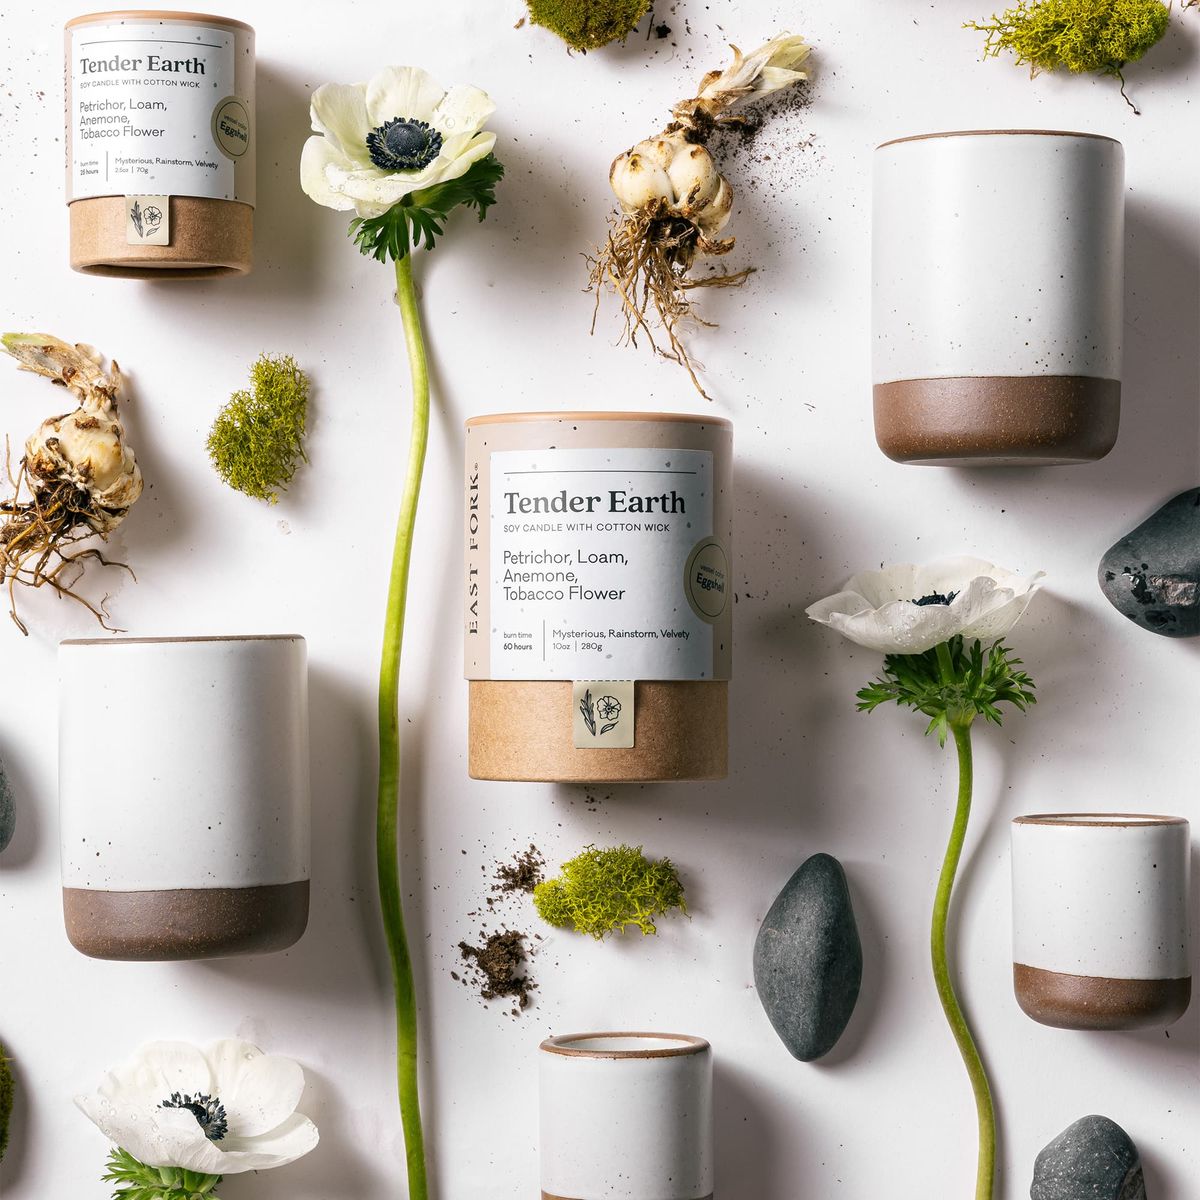 An artful layout of The Candle in Tender Earth - centered is a cardboard packaging tube with the candle's name, surrounded by small and large ceramic candles in a cylindrical vessel in a cool white color, surrounded by anemones, rocks, and moss.